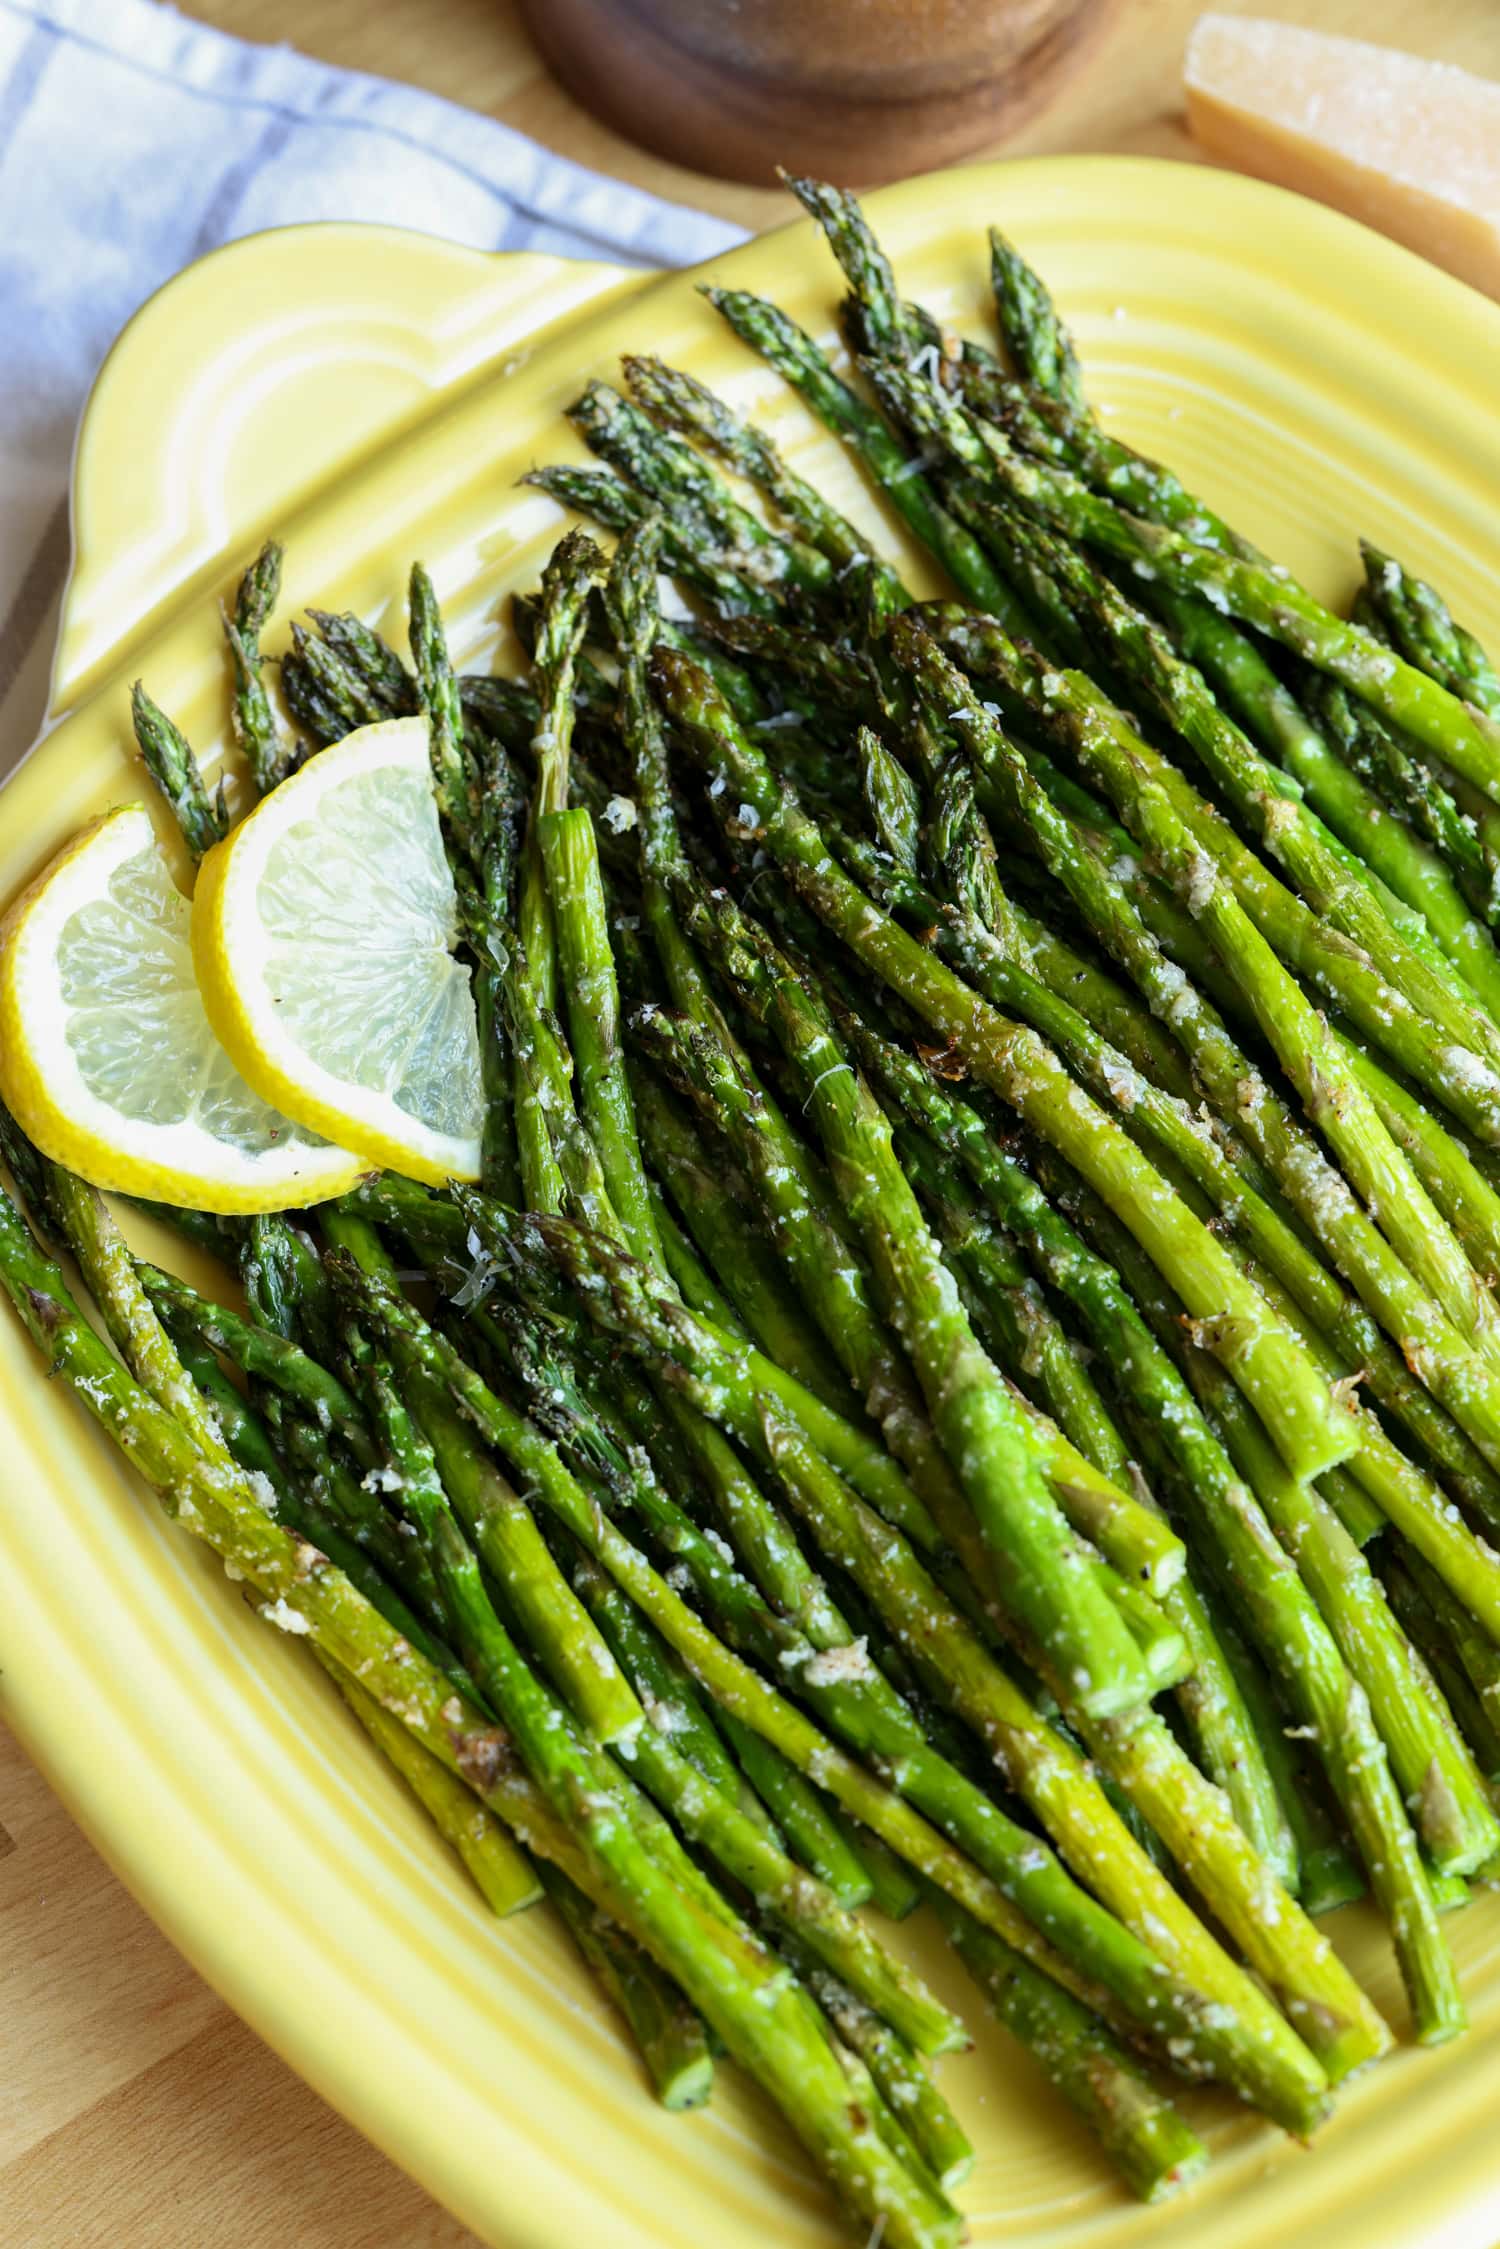 Roasted air fryer asparagus on a yellow square serving platter, garnished with lemon slices.